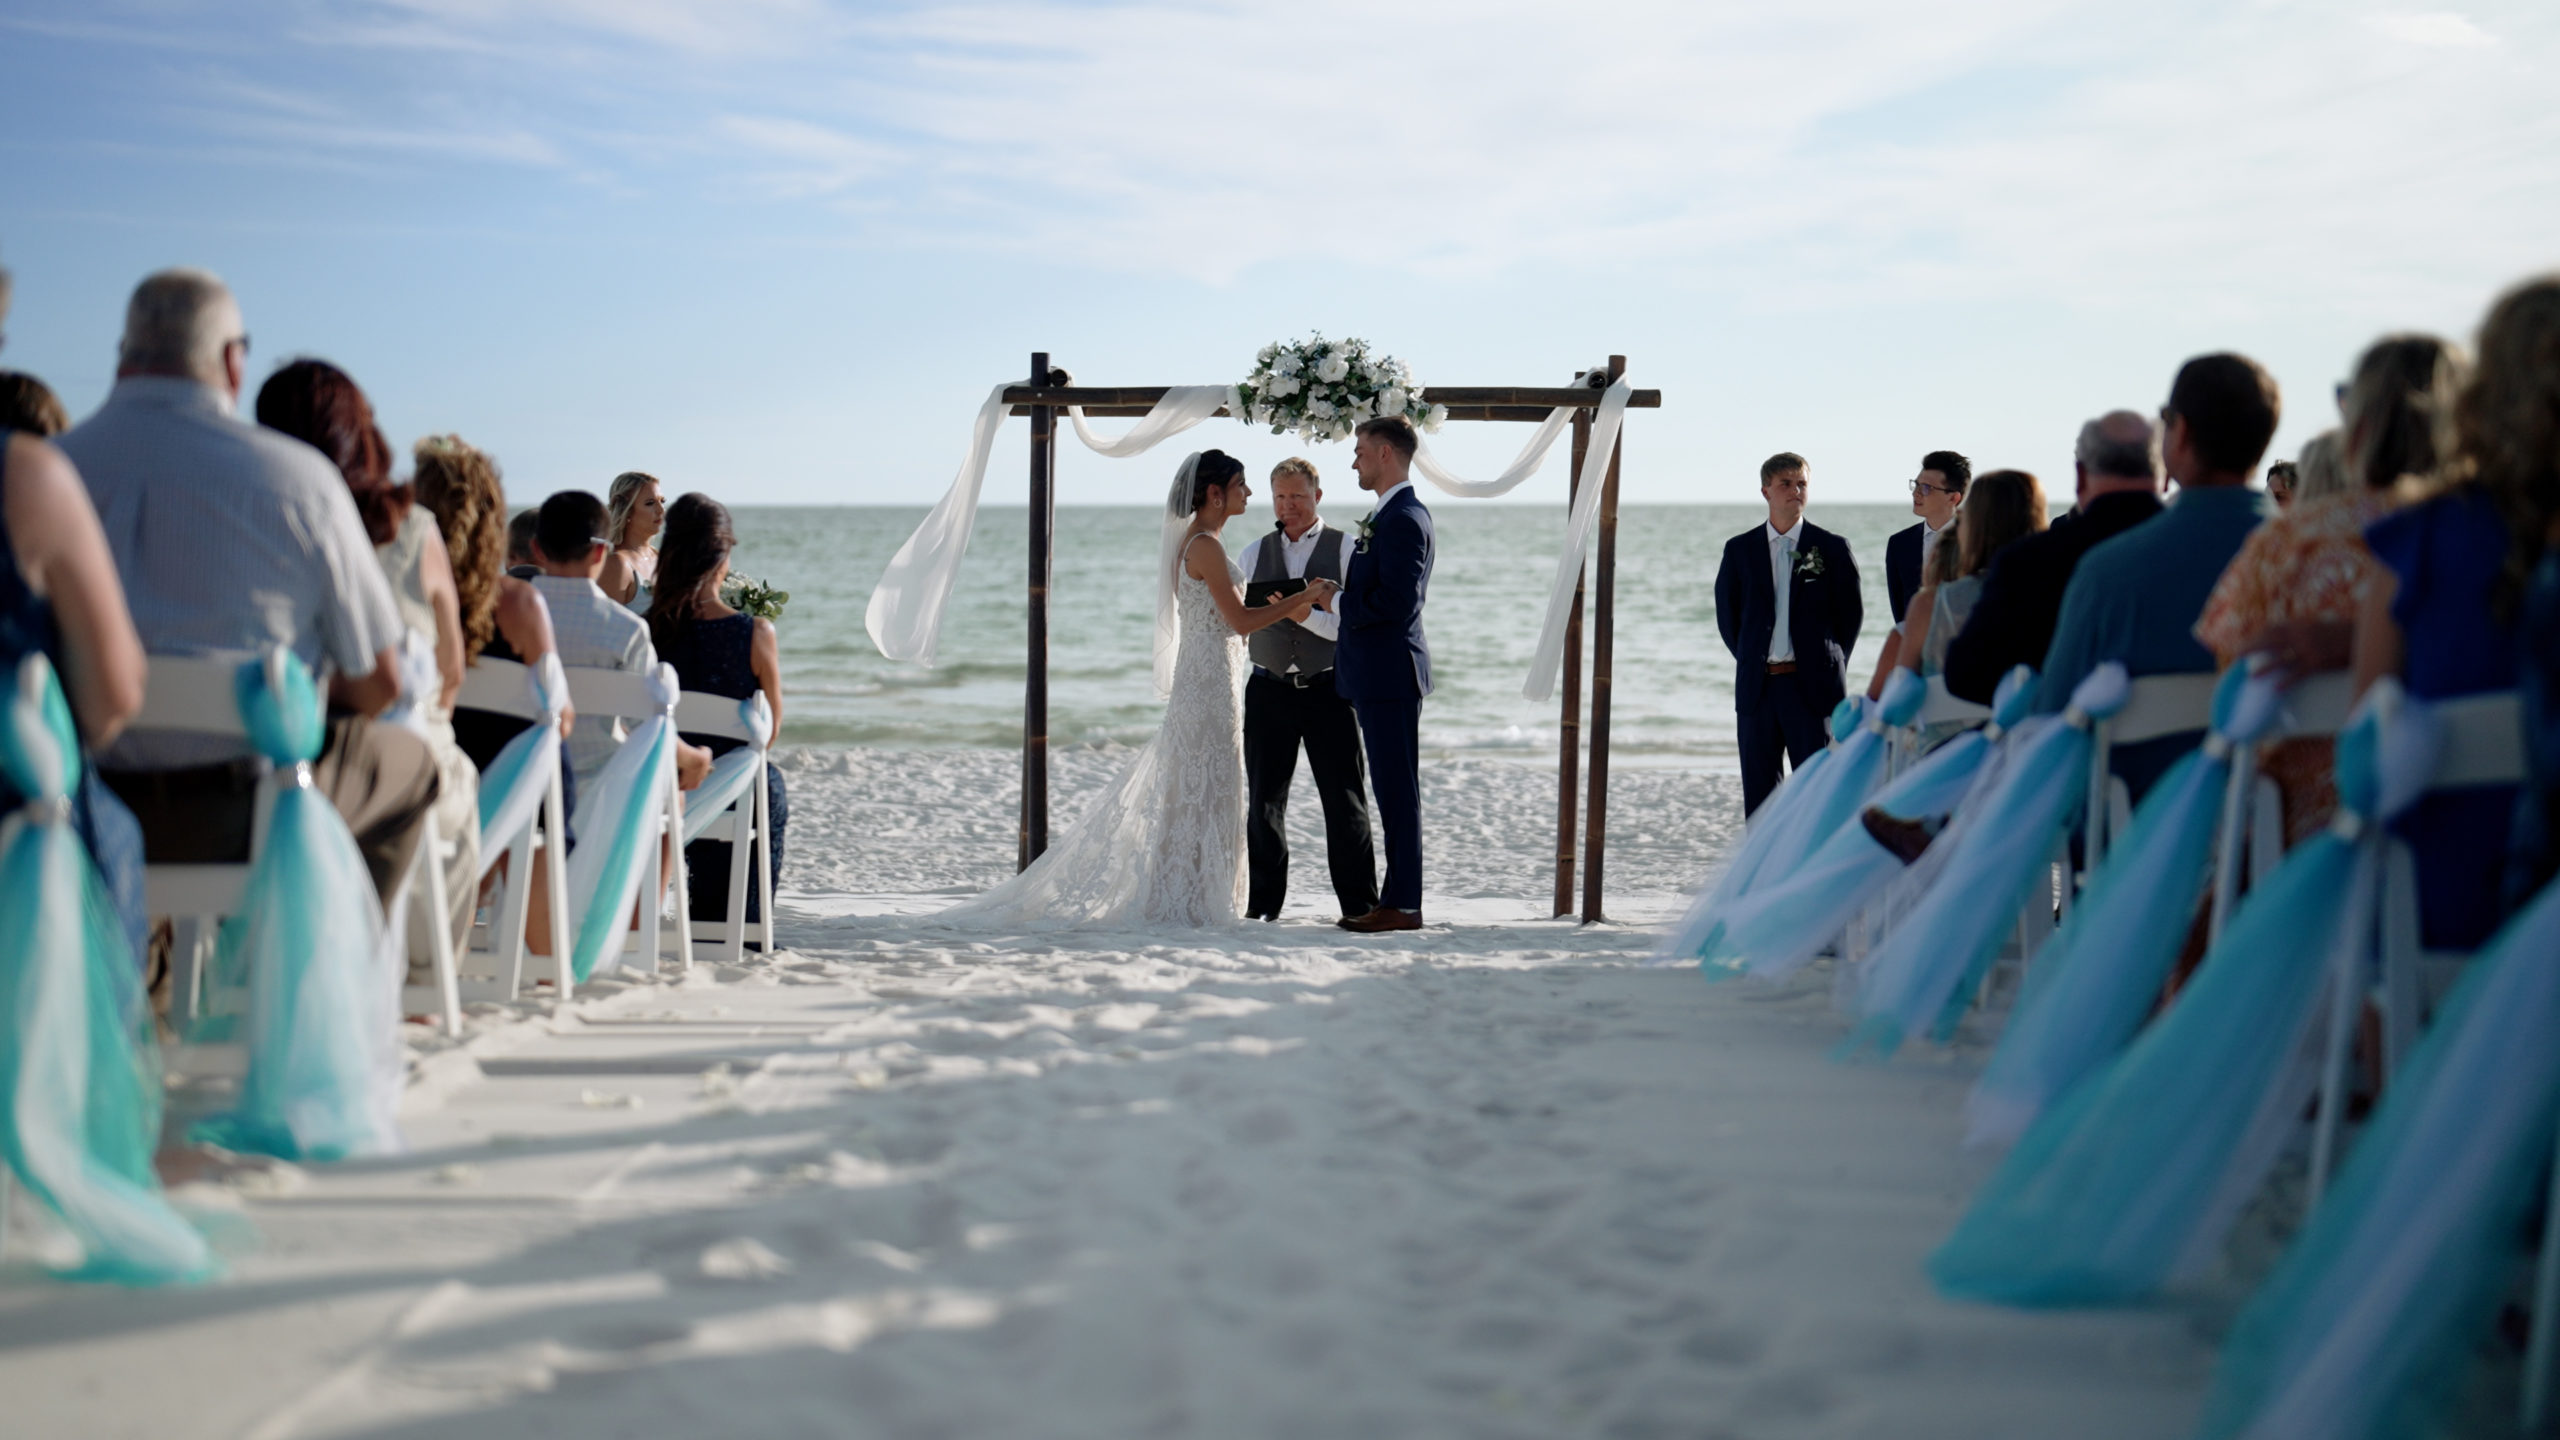 A Complete Guide to Weddings in Destin Florida: What to Consider